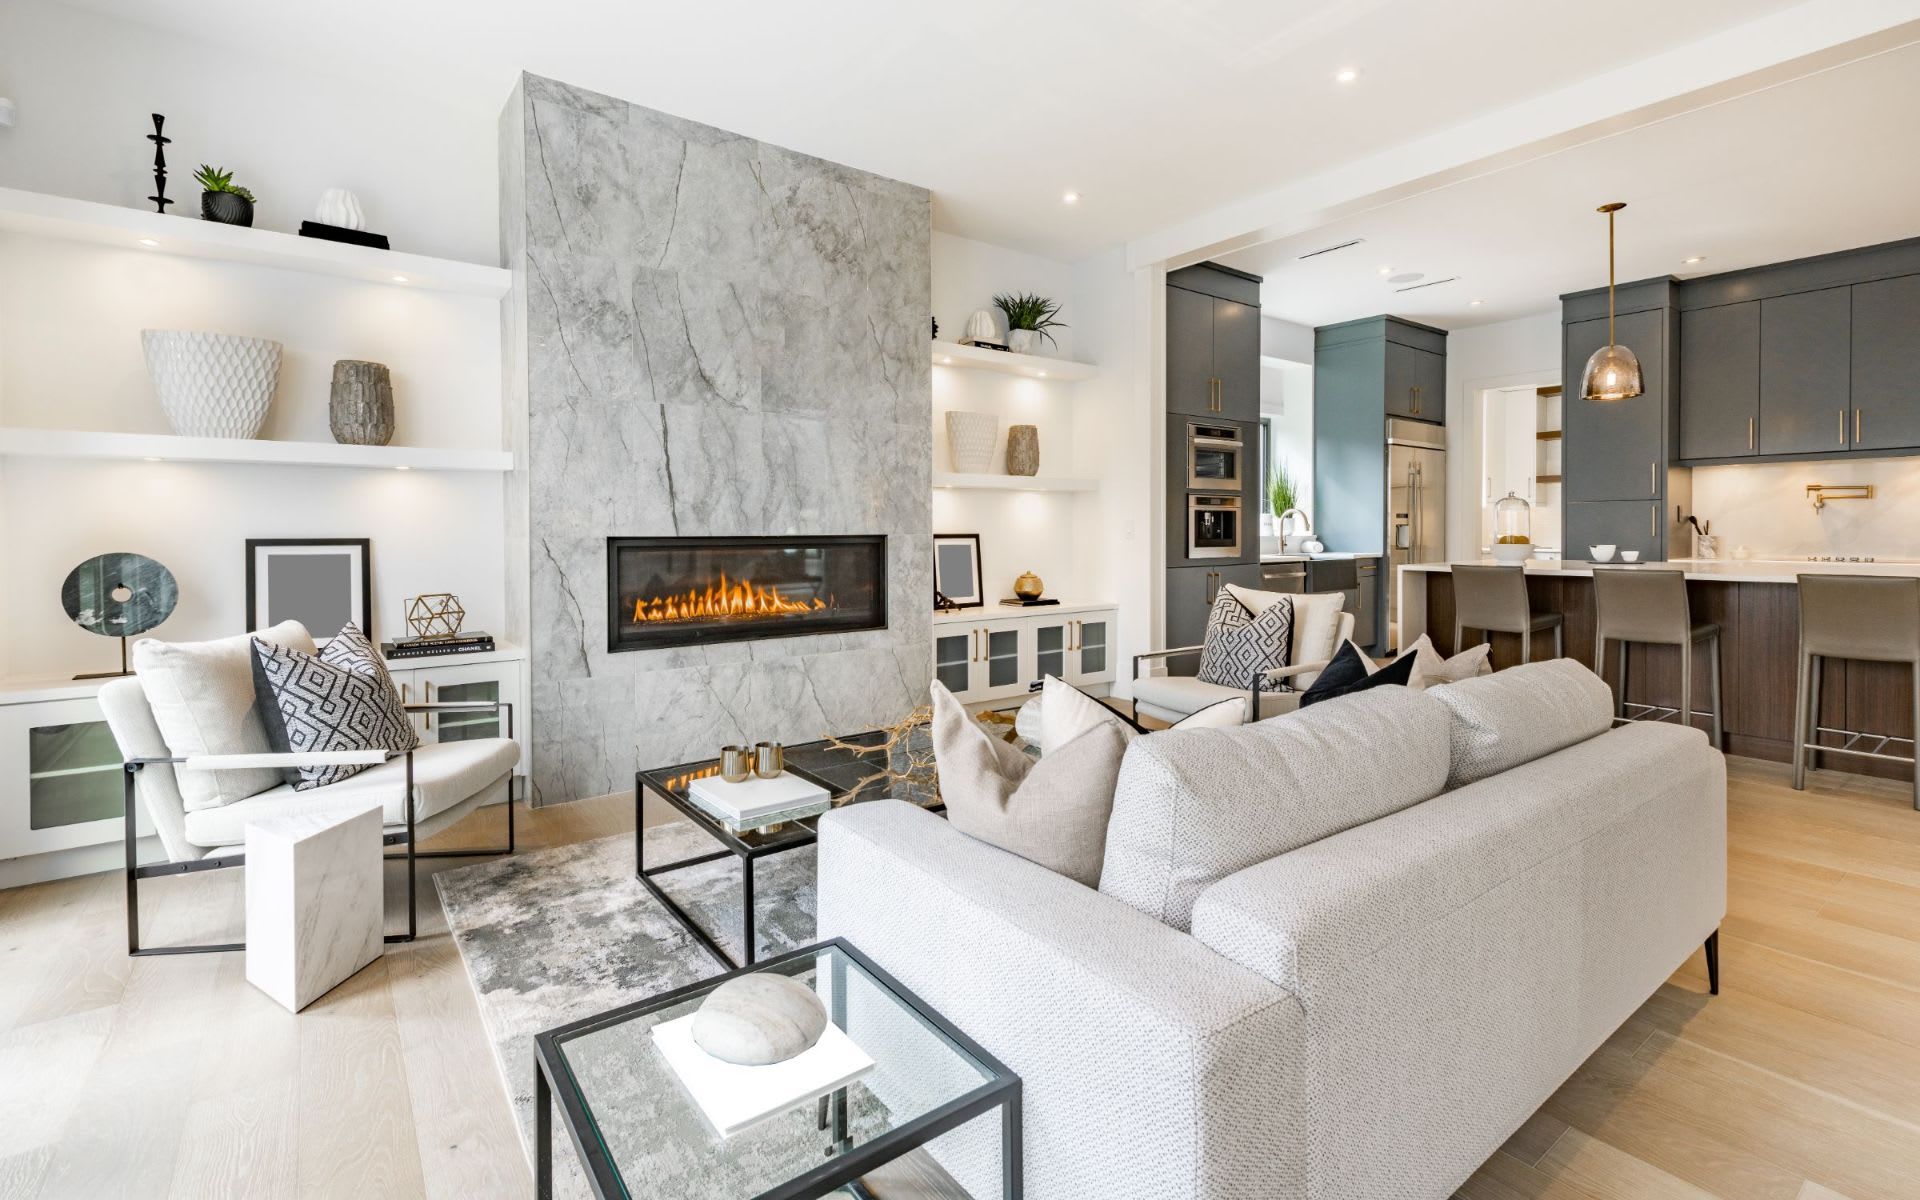 A modern, open-concept living room with a sleek marble fireplace